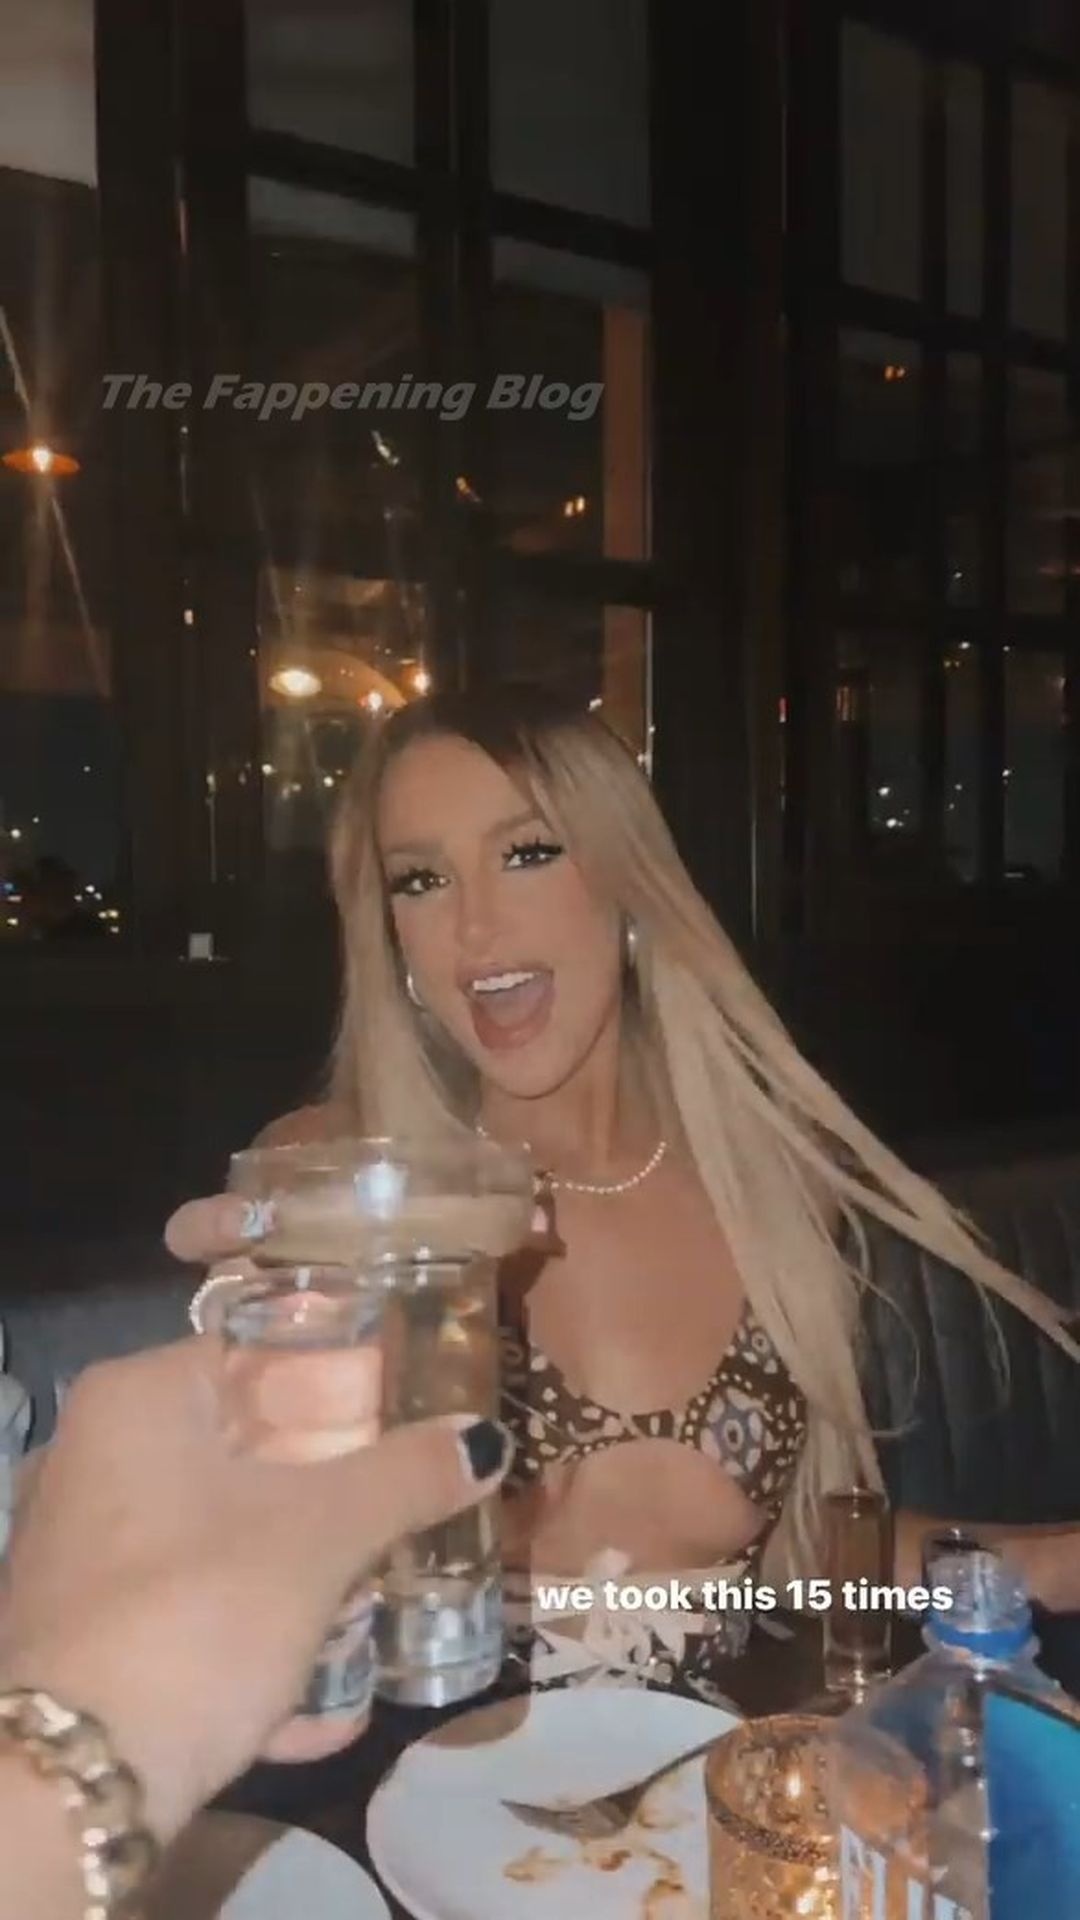 Busty Tana Mongeau Looks Stylish for a Night on the Town in LA (20 Photos)